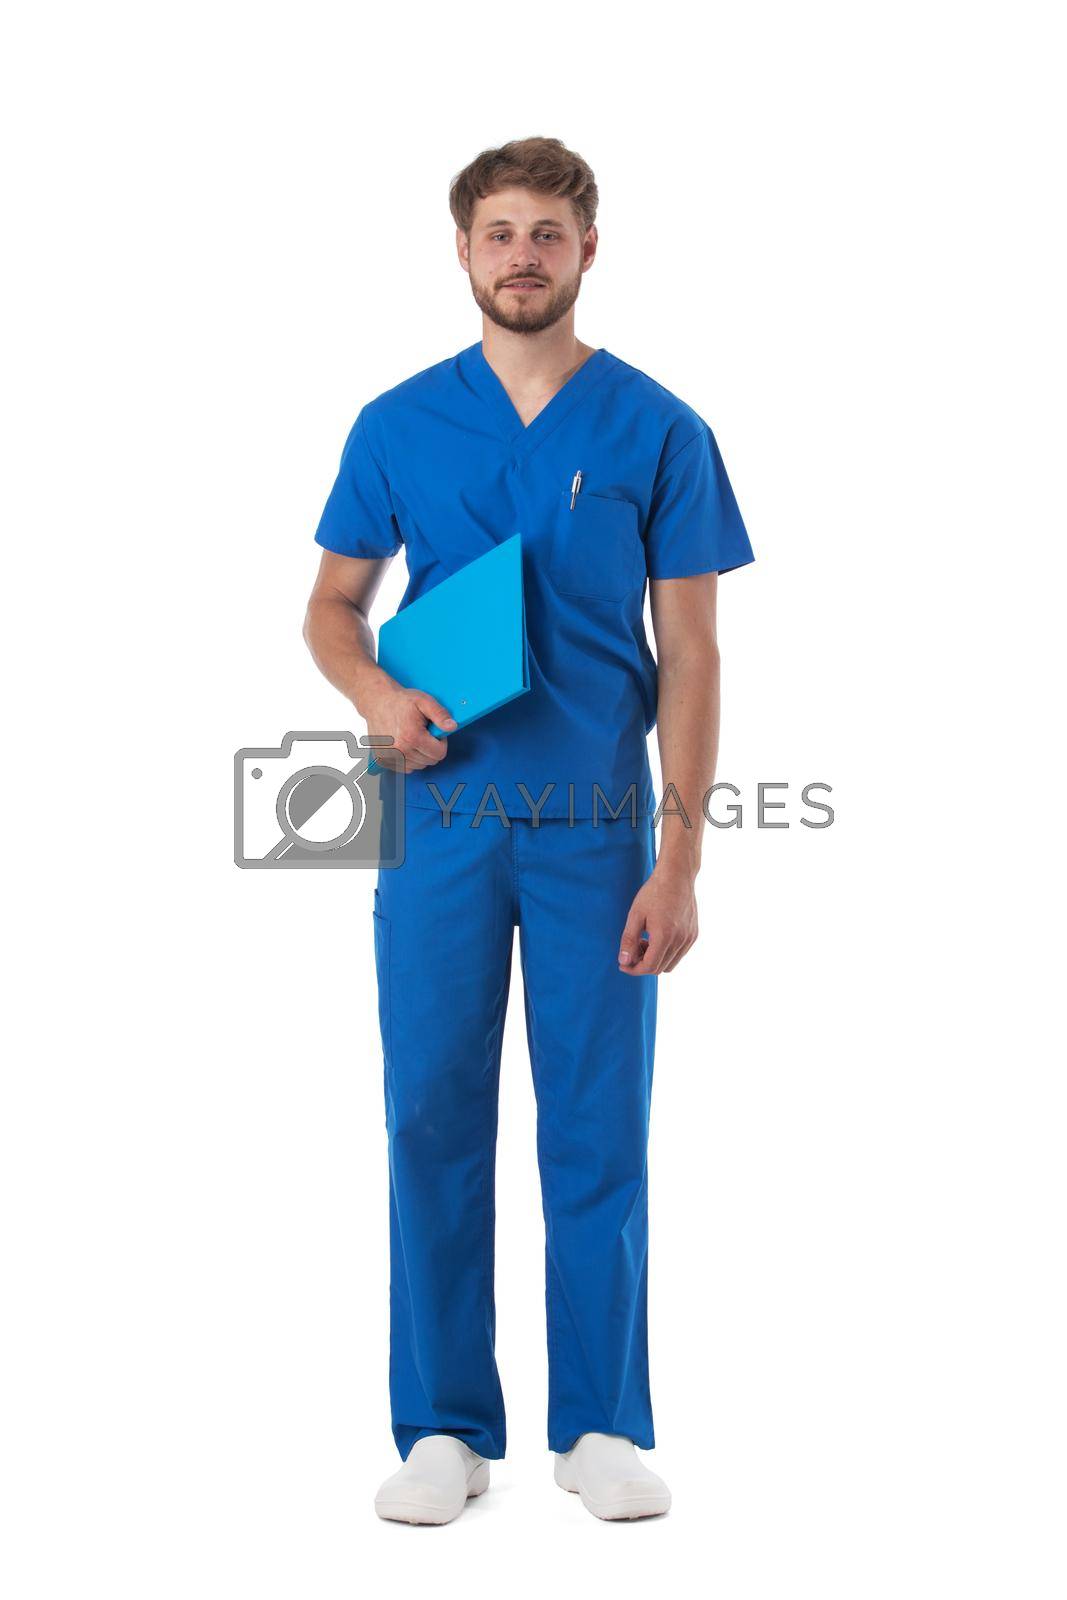 Royalty free image of Male nurse isolated on white by ALotOfPeople